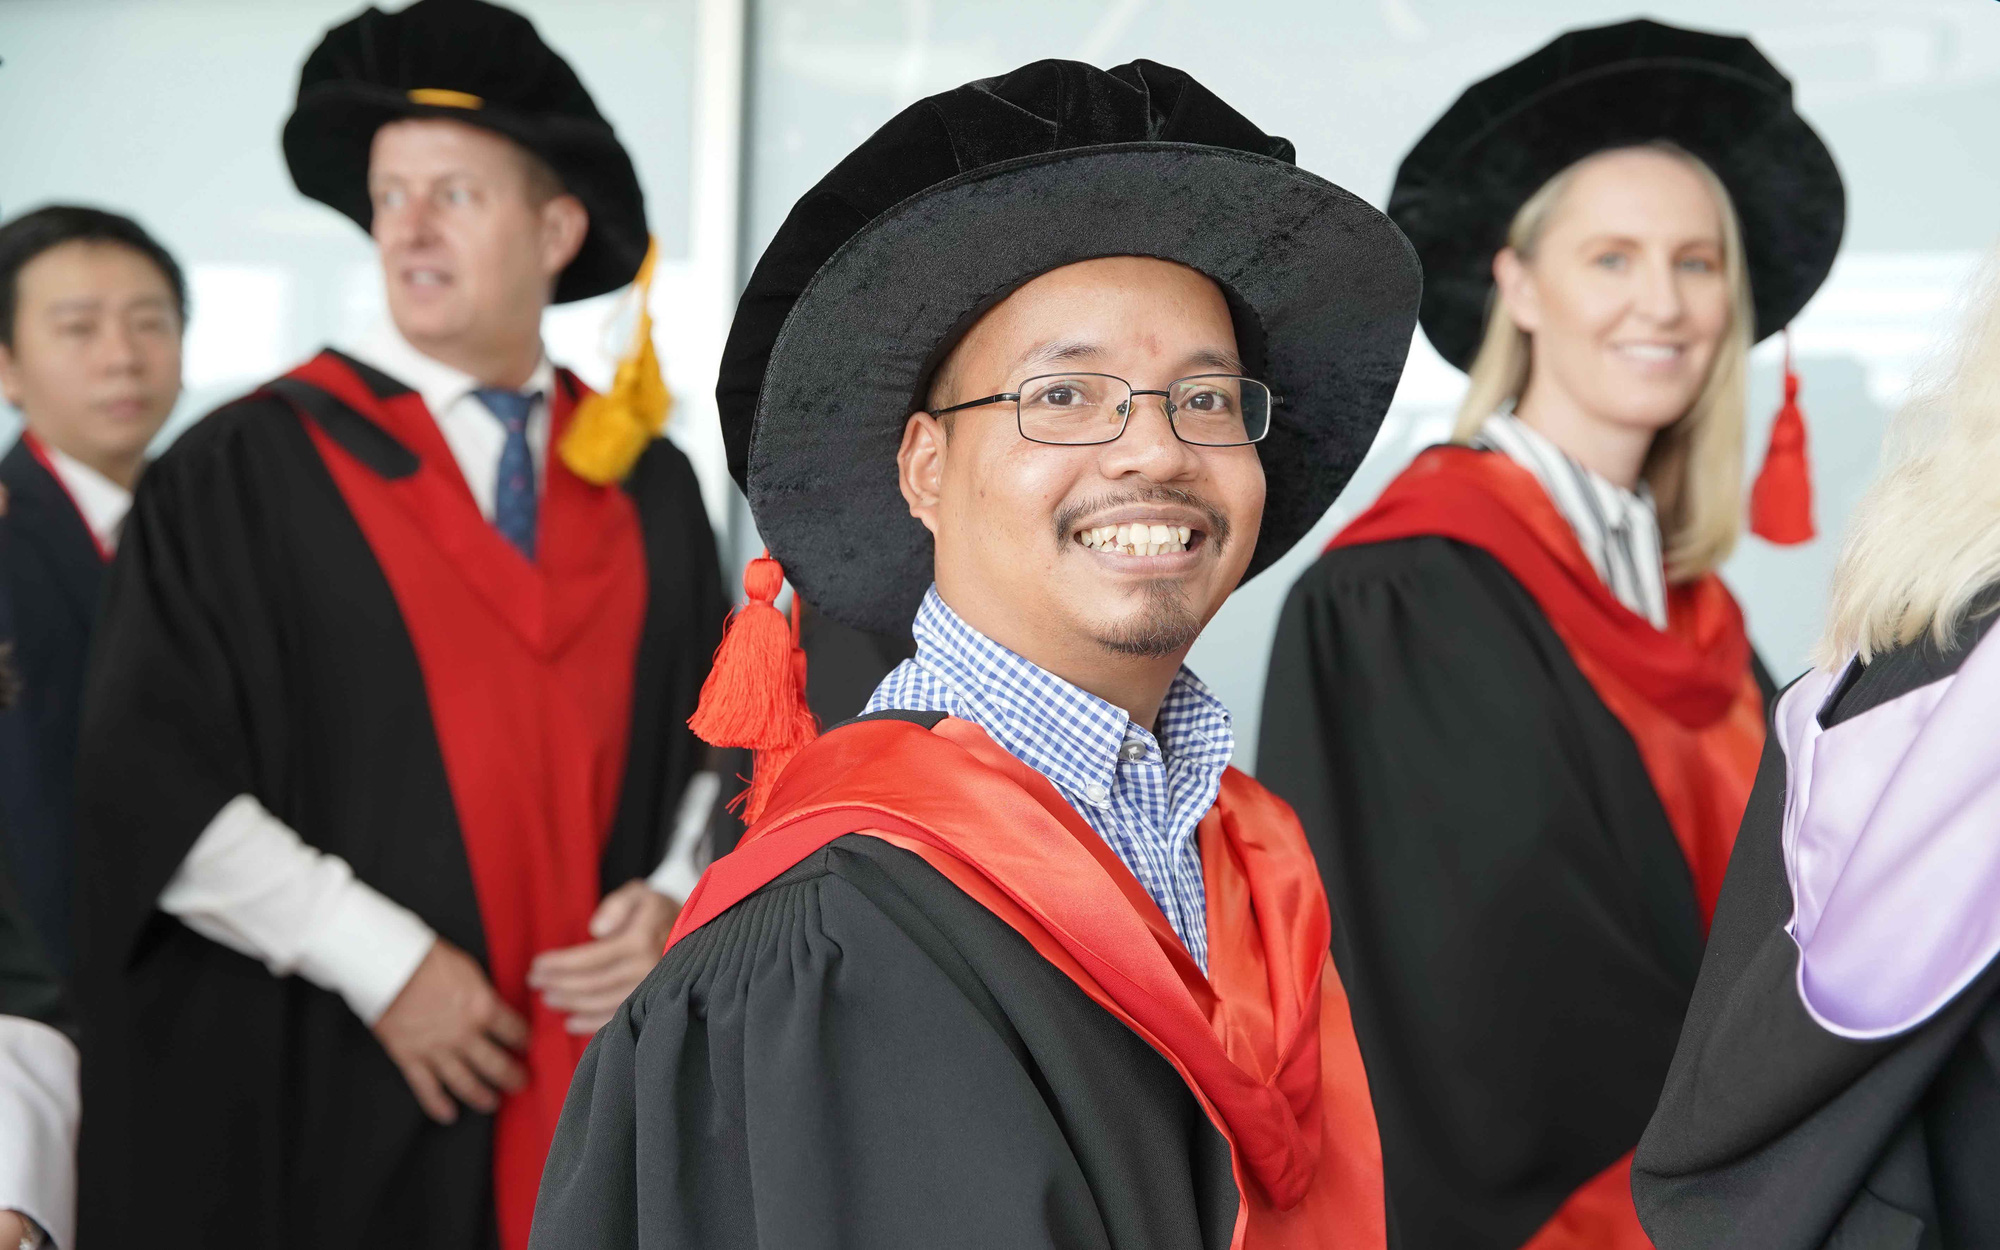 ‘Dare to dream’ man becomes first PhD holder of Vietnam’s Co Tu ethnic group